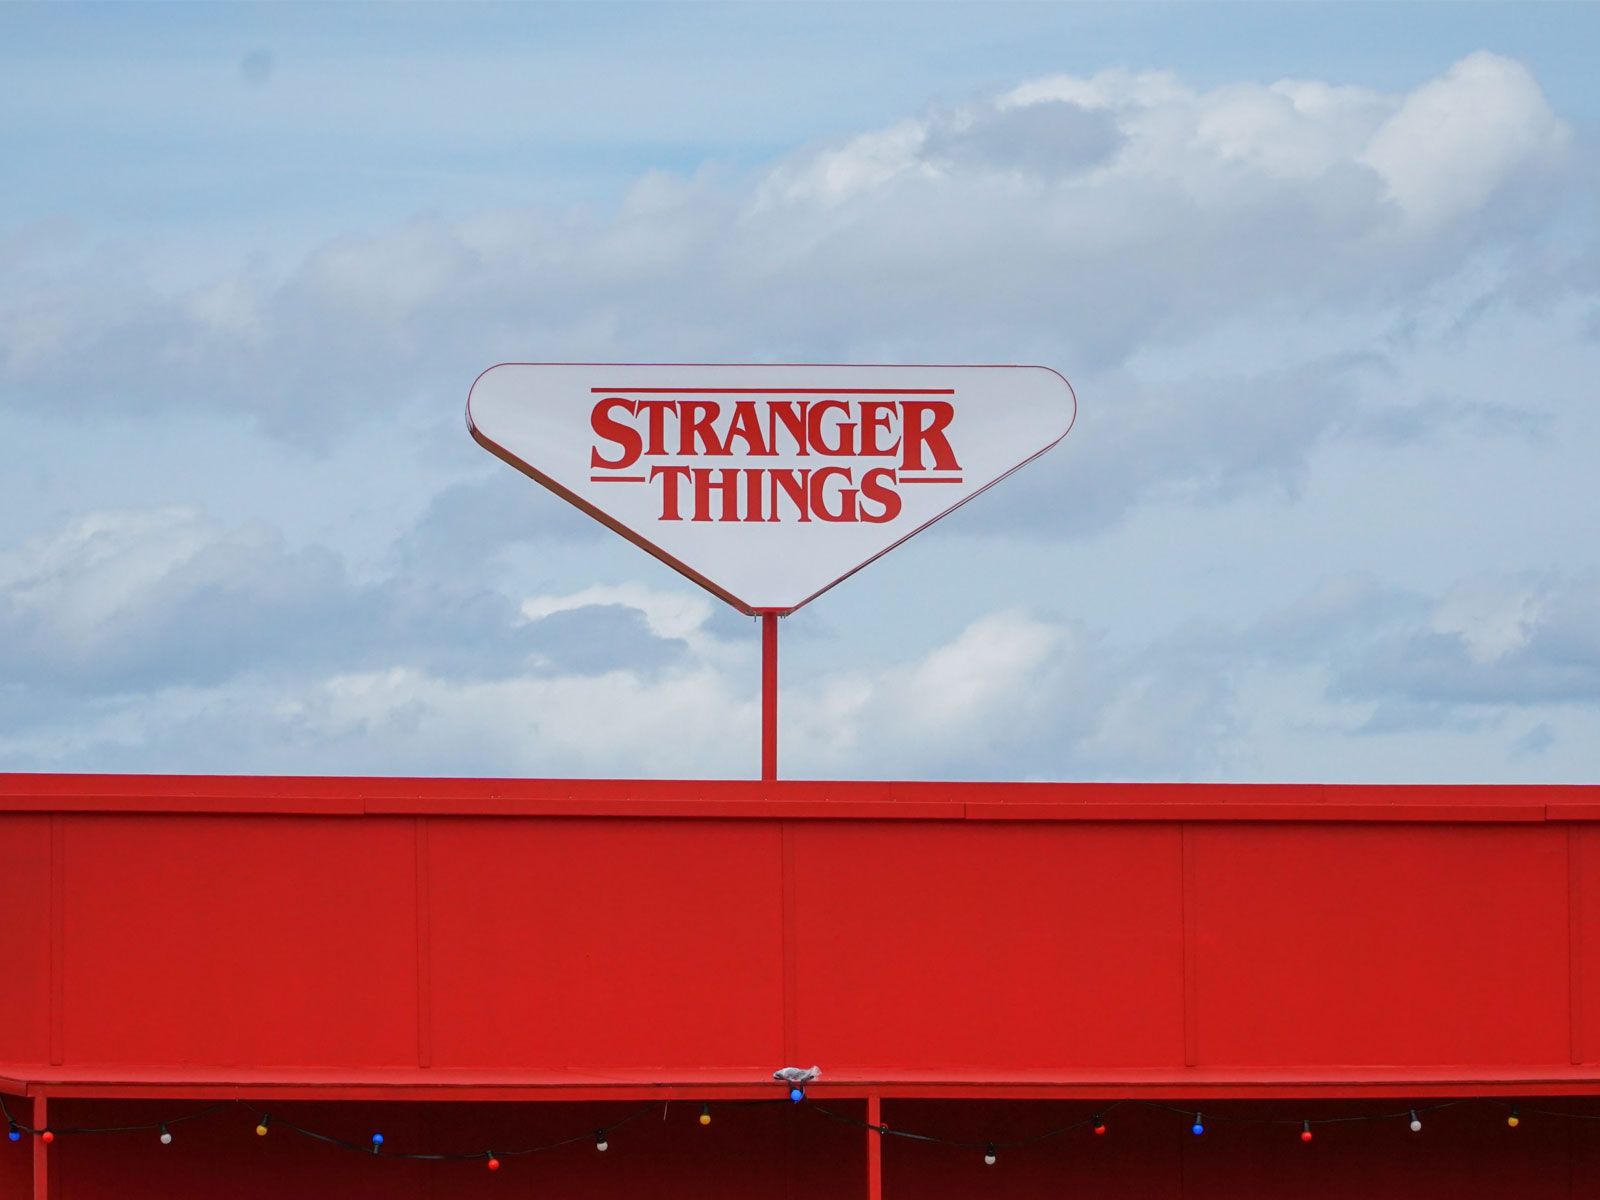 A red building with white letters on it - Stranger Things